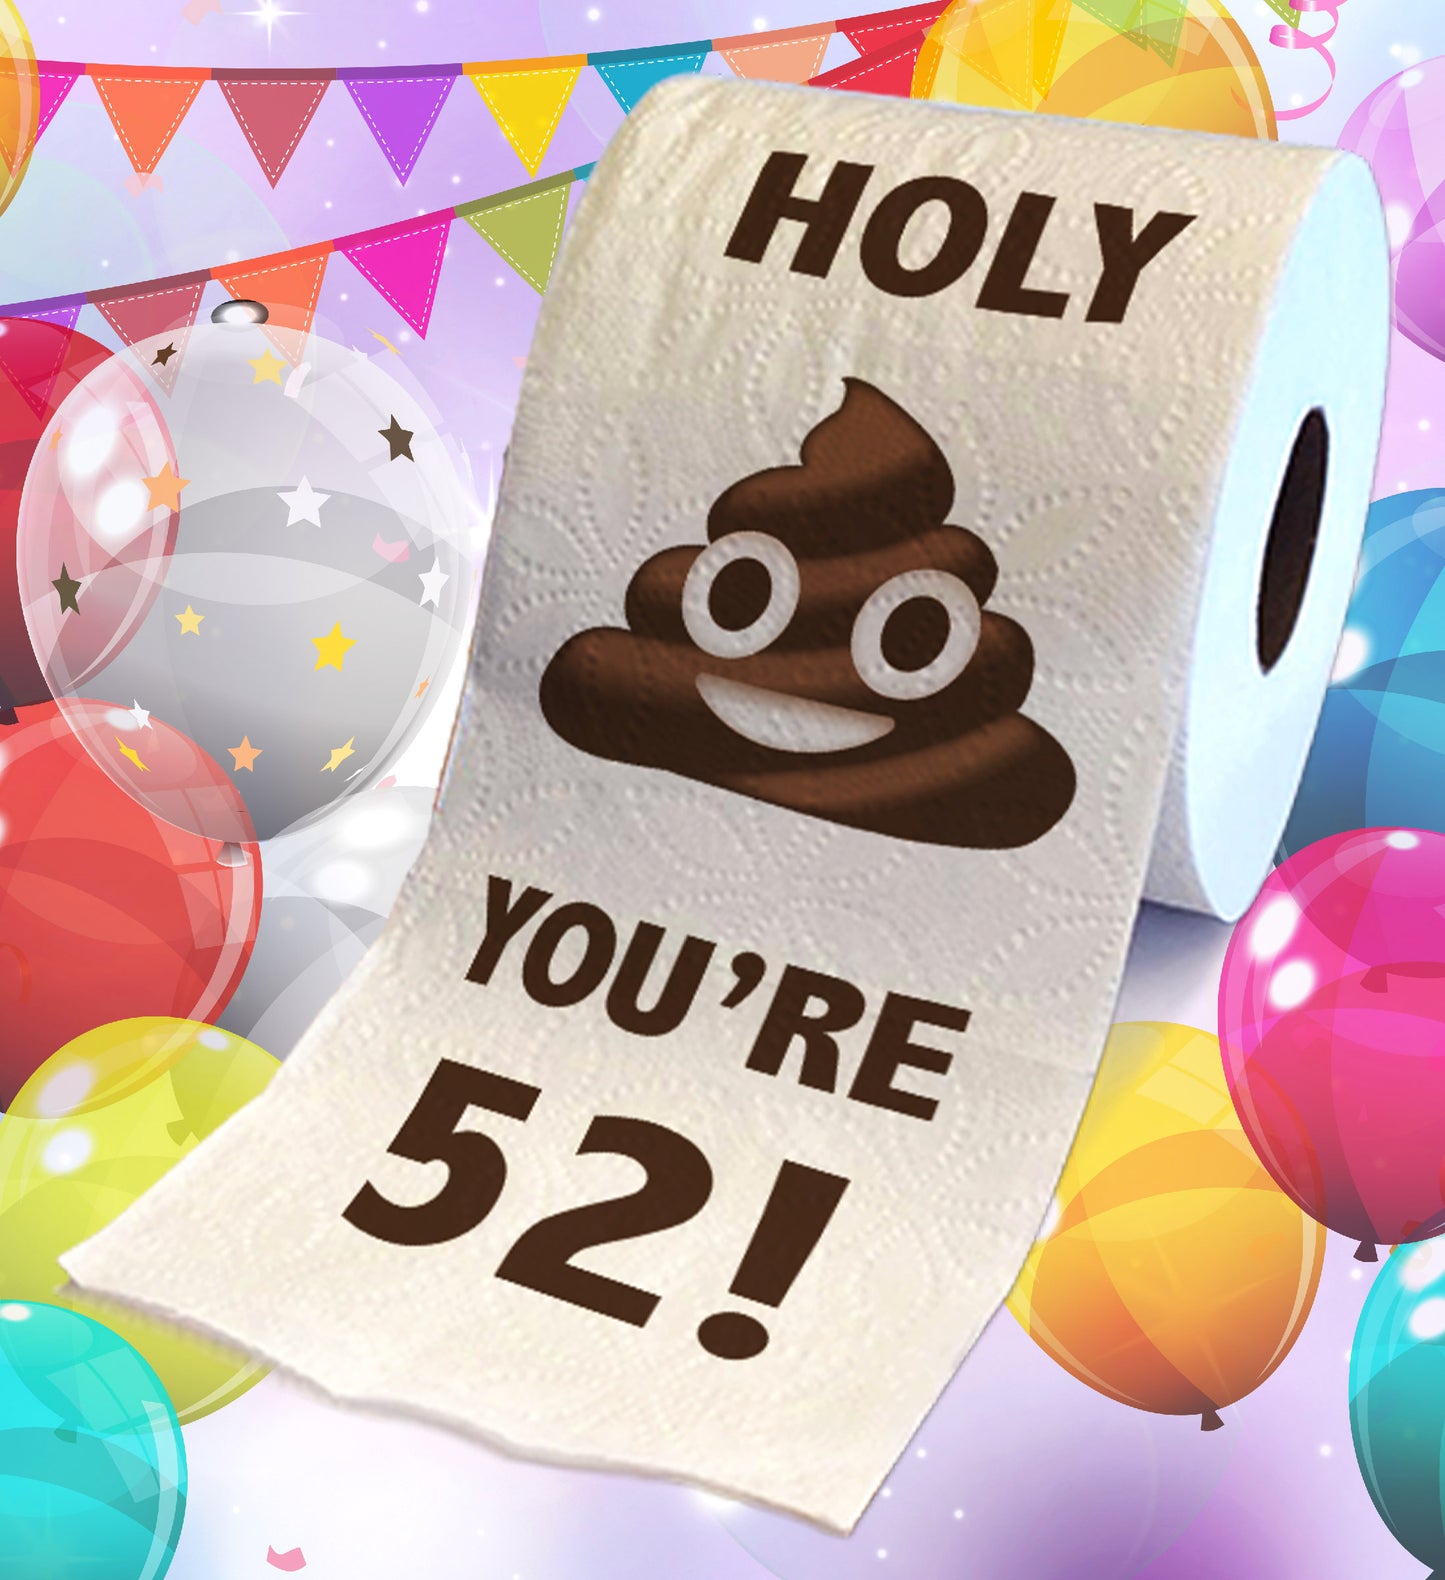 Printed TP Holy Poop You're 52 Funny Toilet Paper Roll Birthday Party Gag Gift